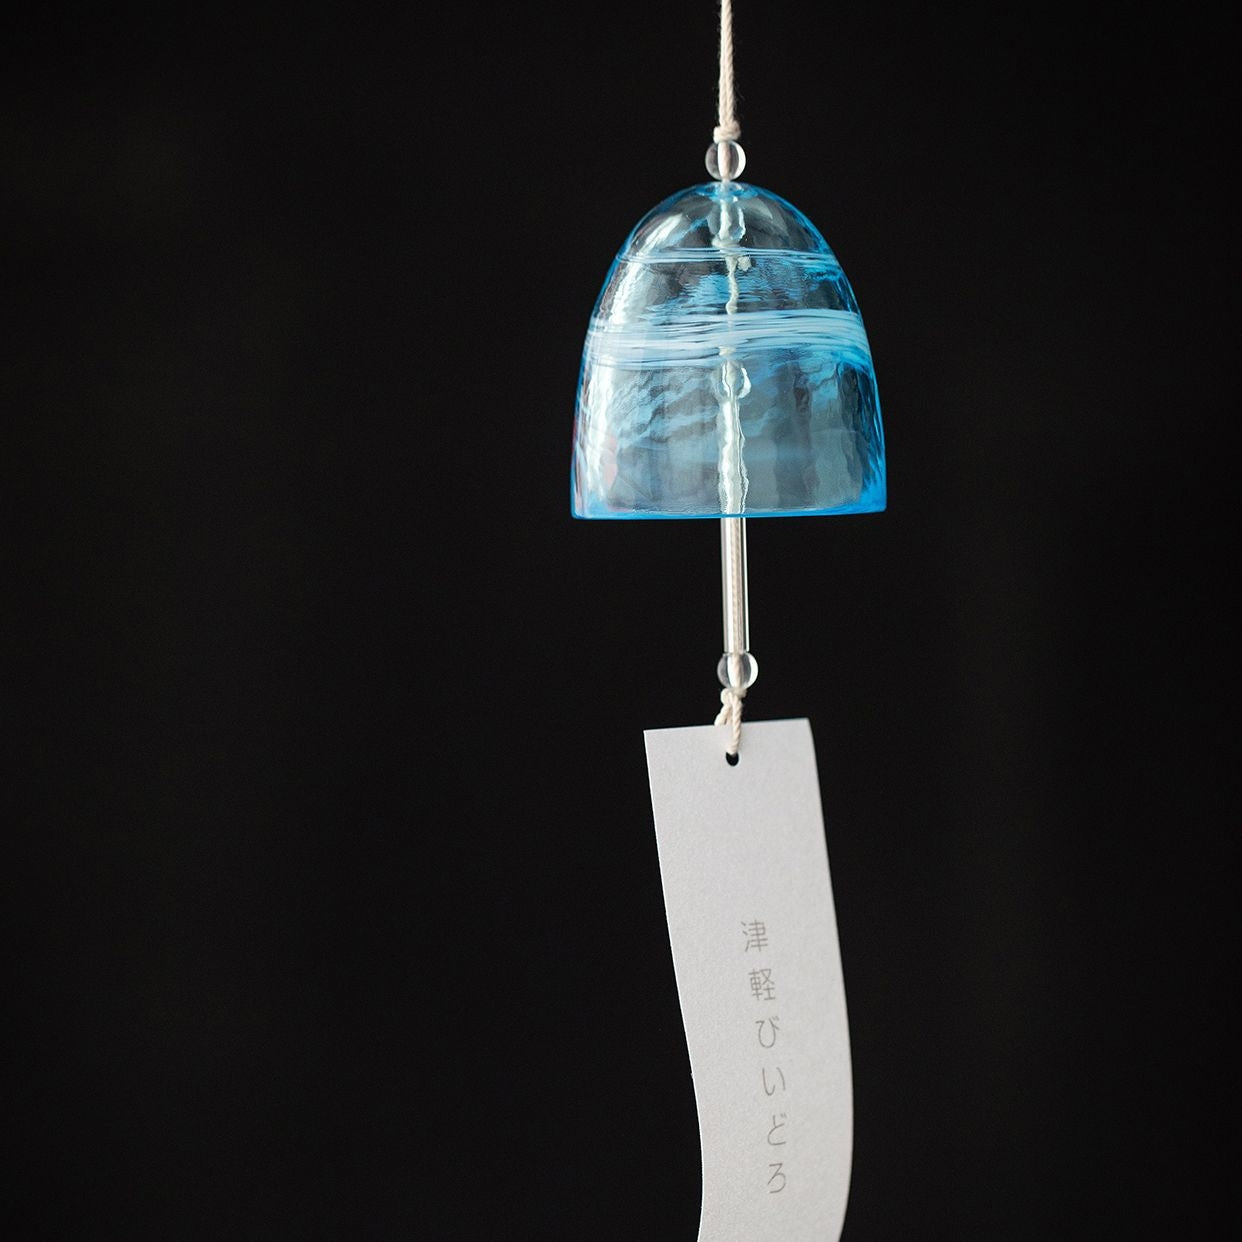 Aderia Handcrafted Glass Wind Chime